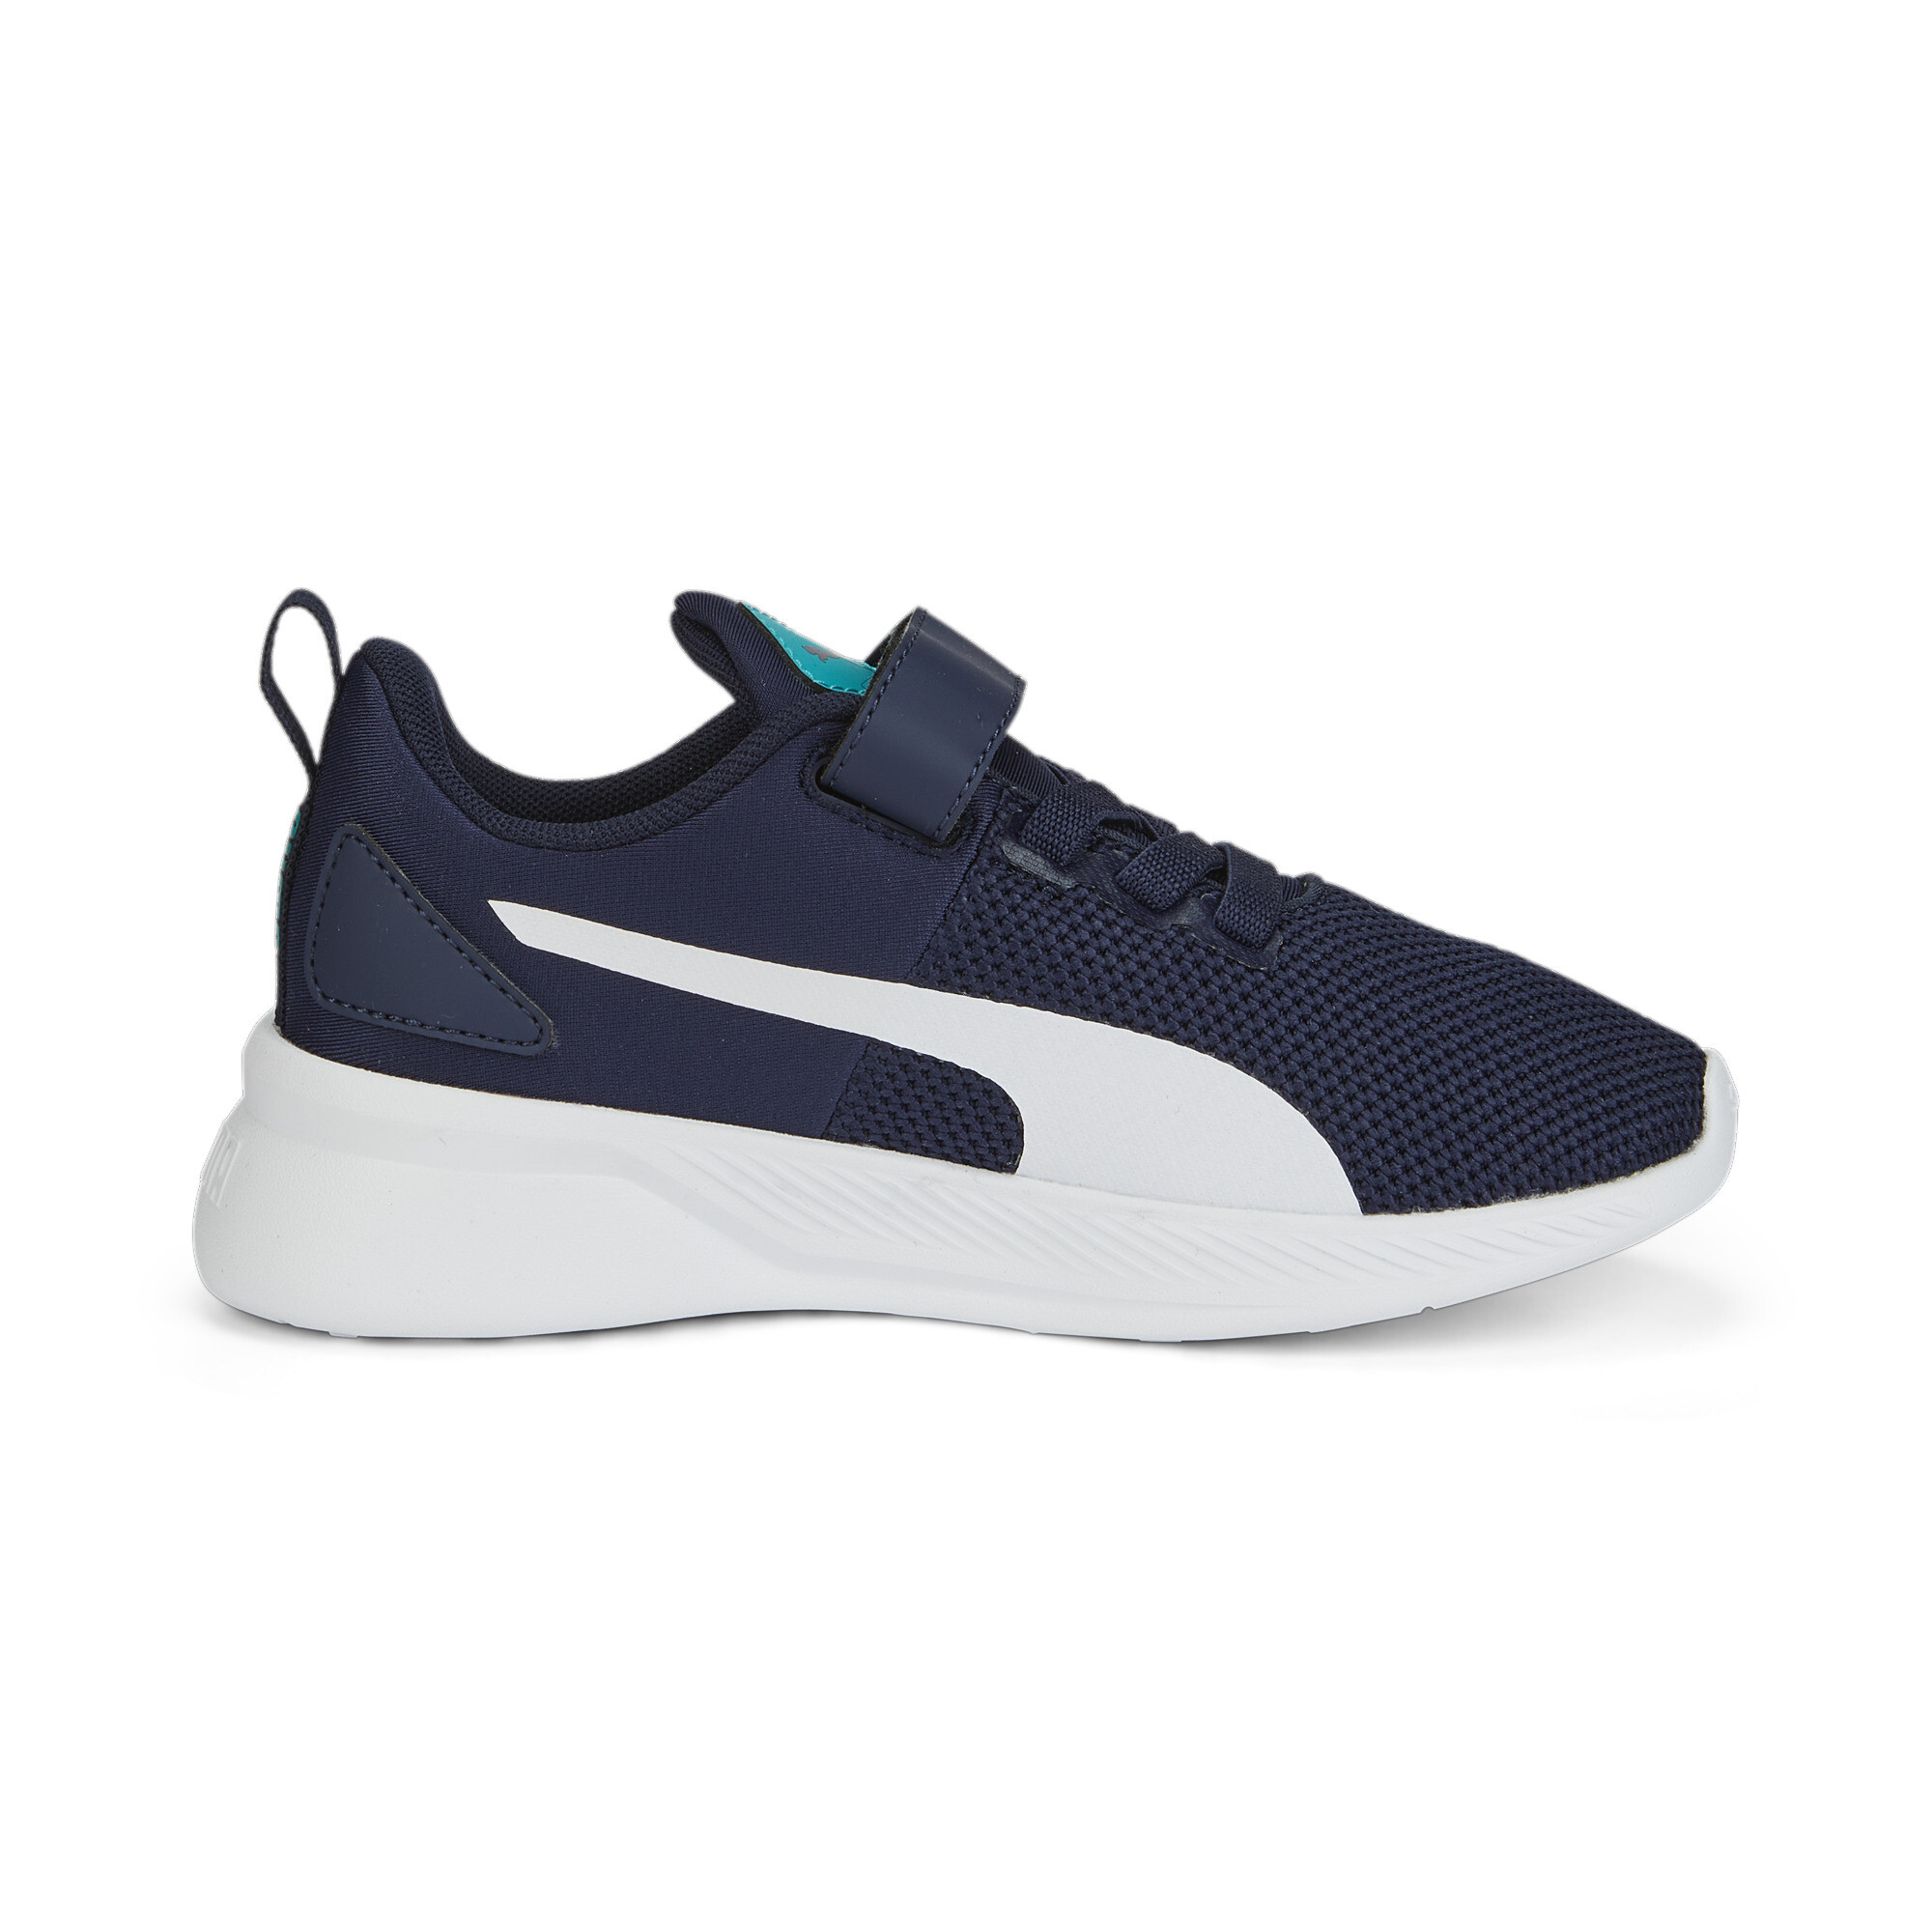 Kids' PUMA Flyer Runner V Trainers Shoes In Blue, Size EU 35